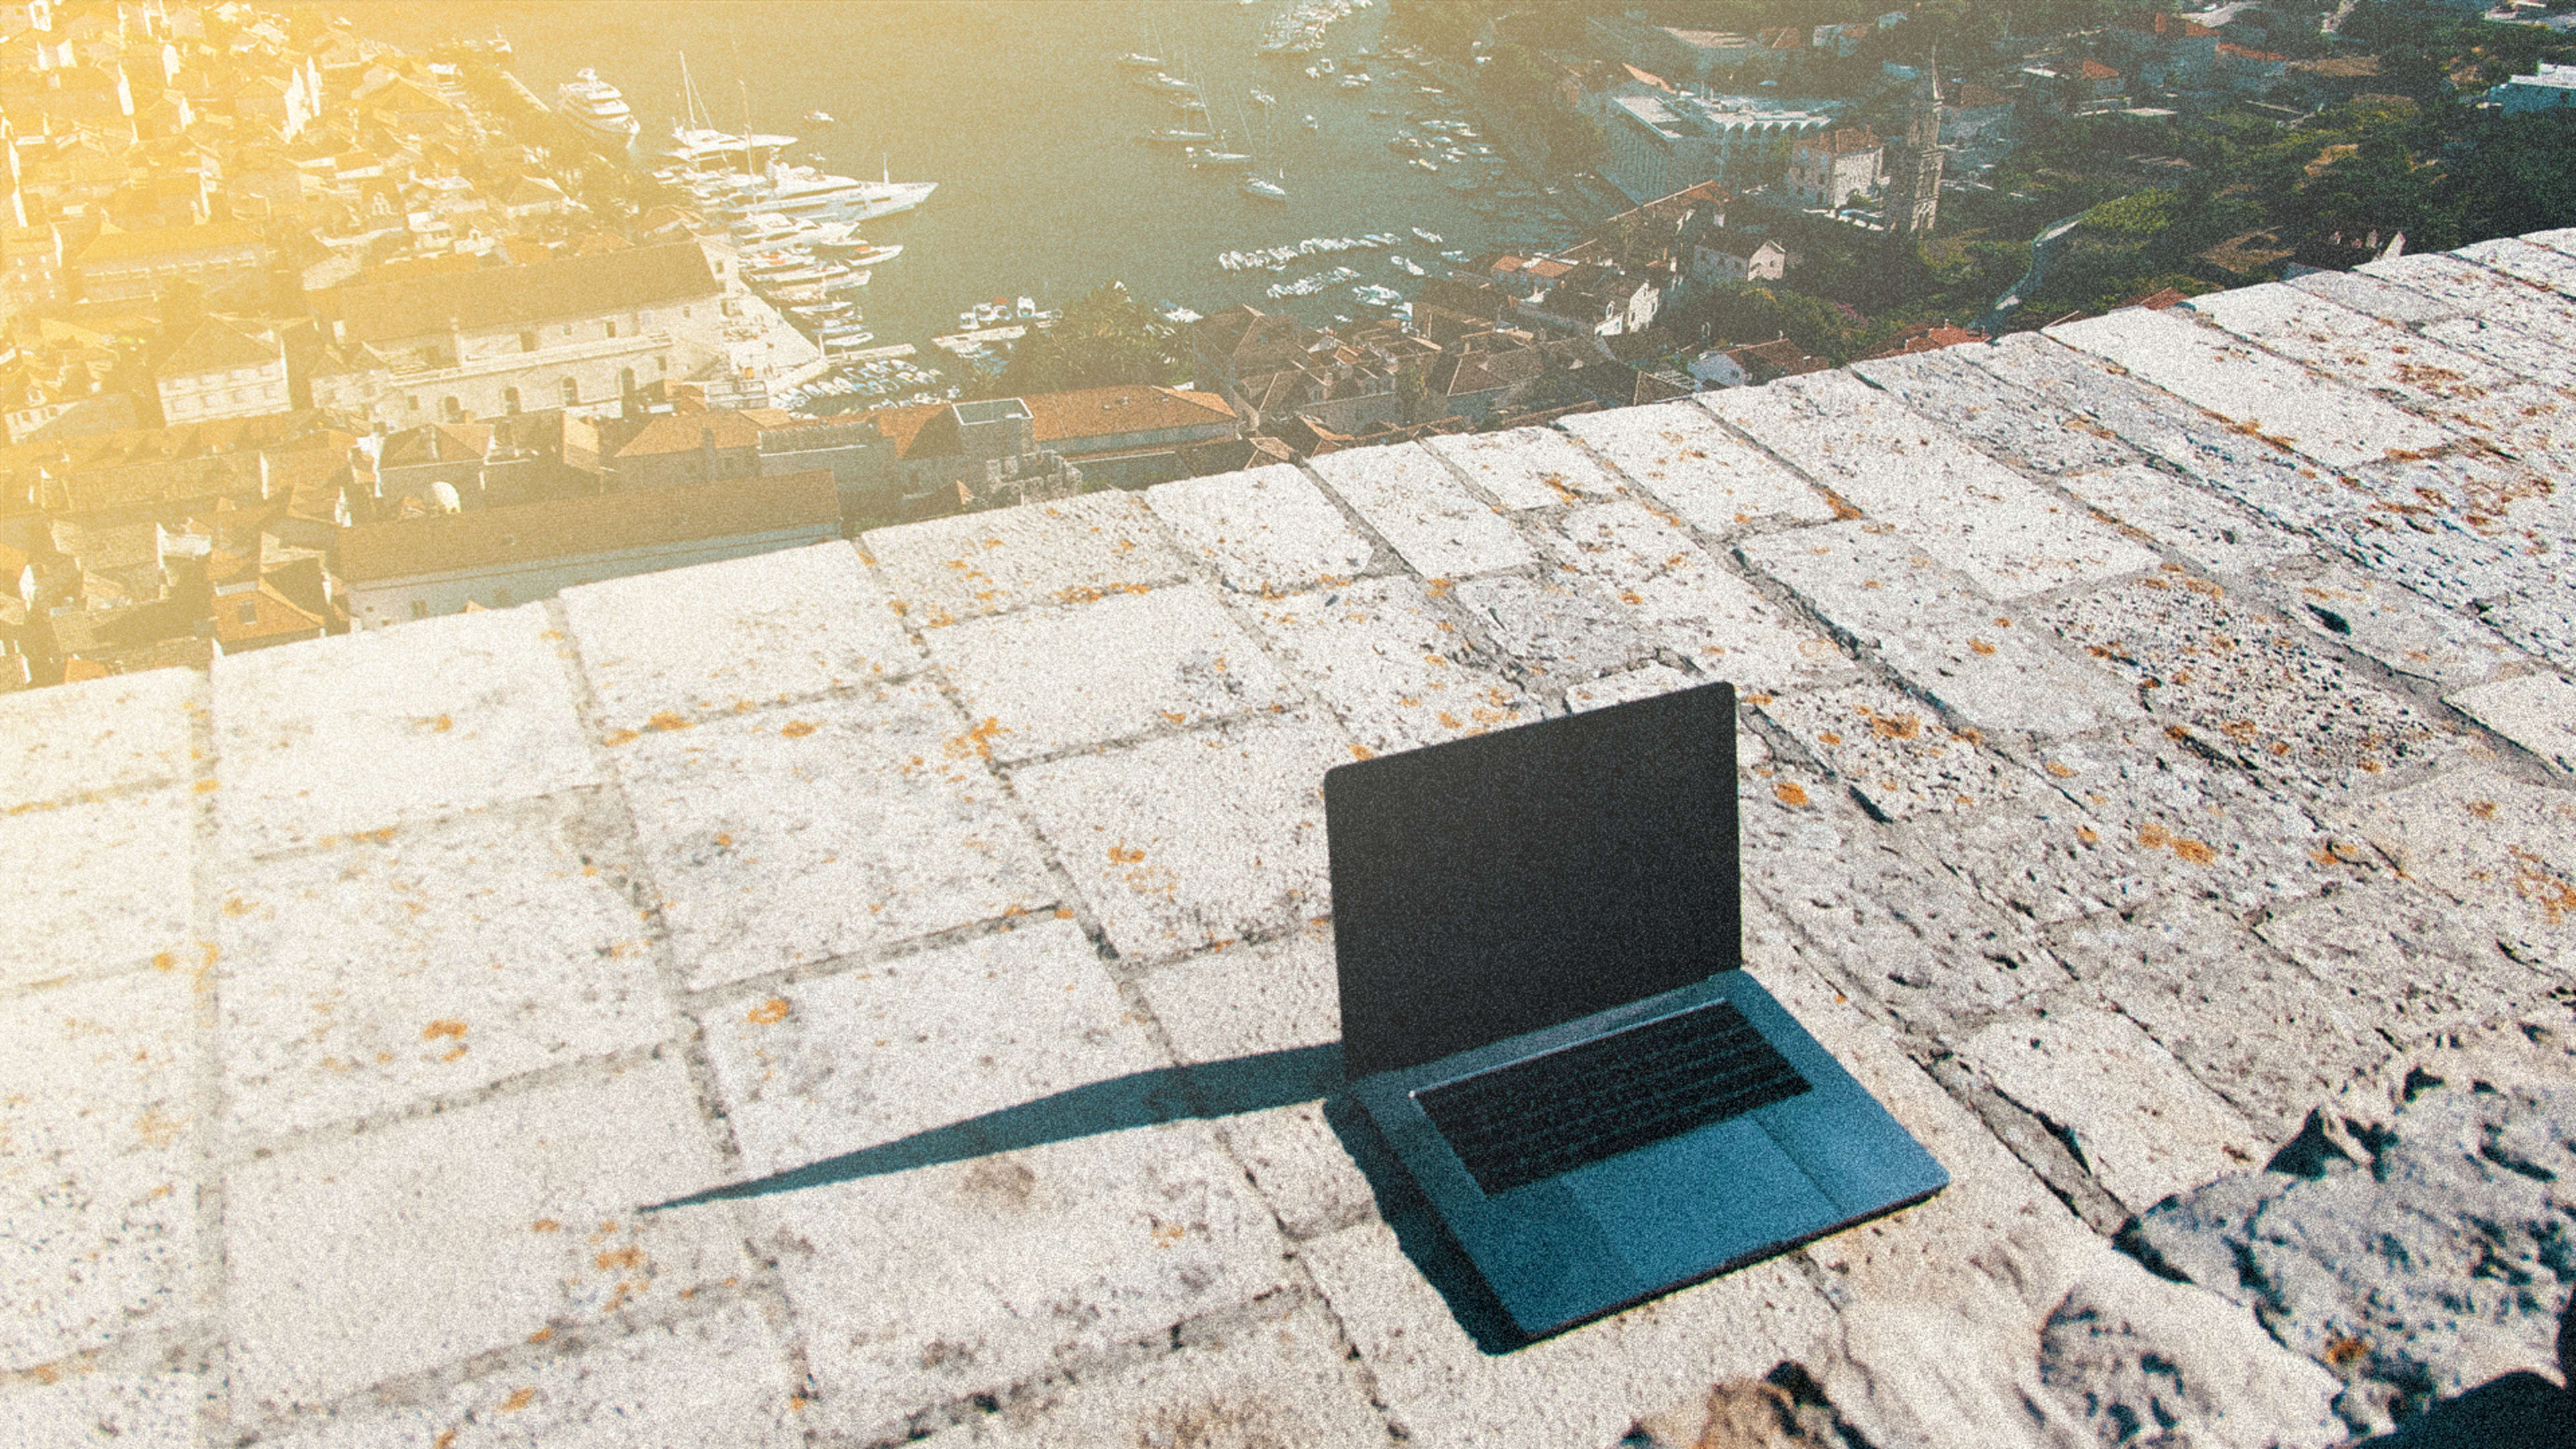 I’ve been a digital nomad for years. This is why the pandemic might be the best time for you to try it